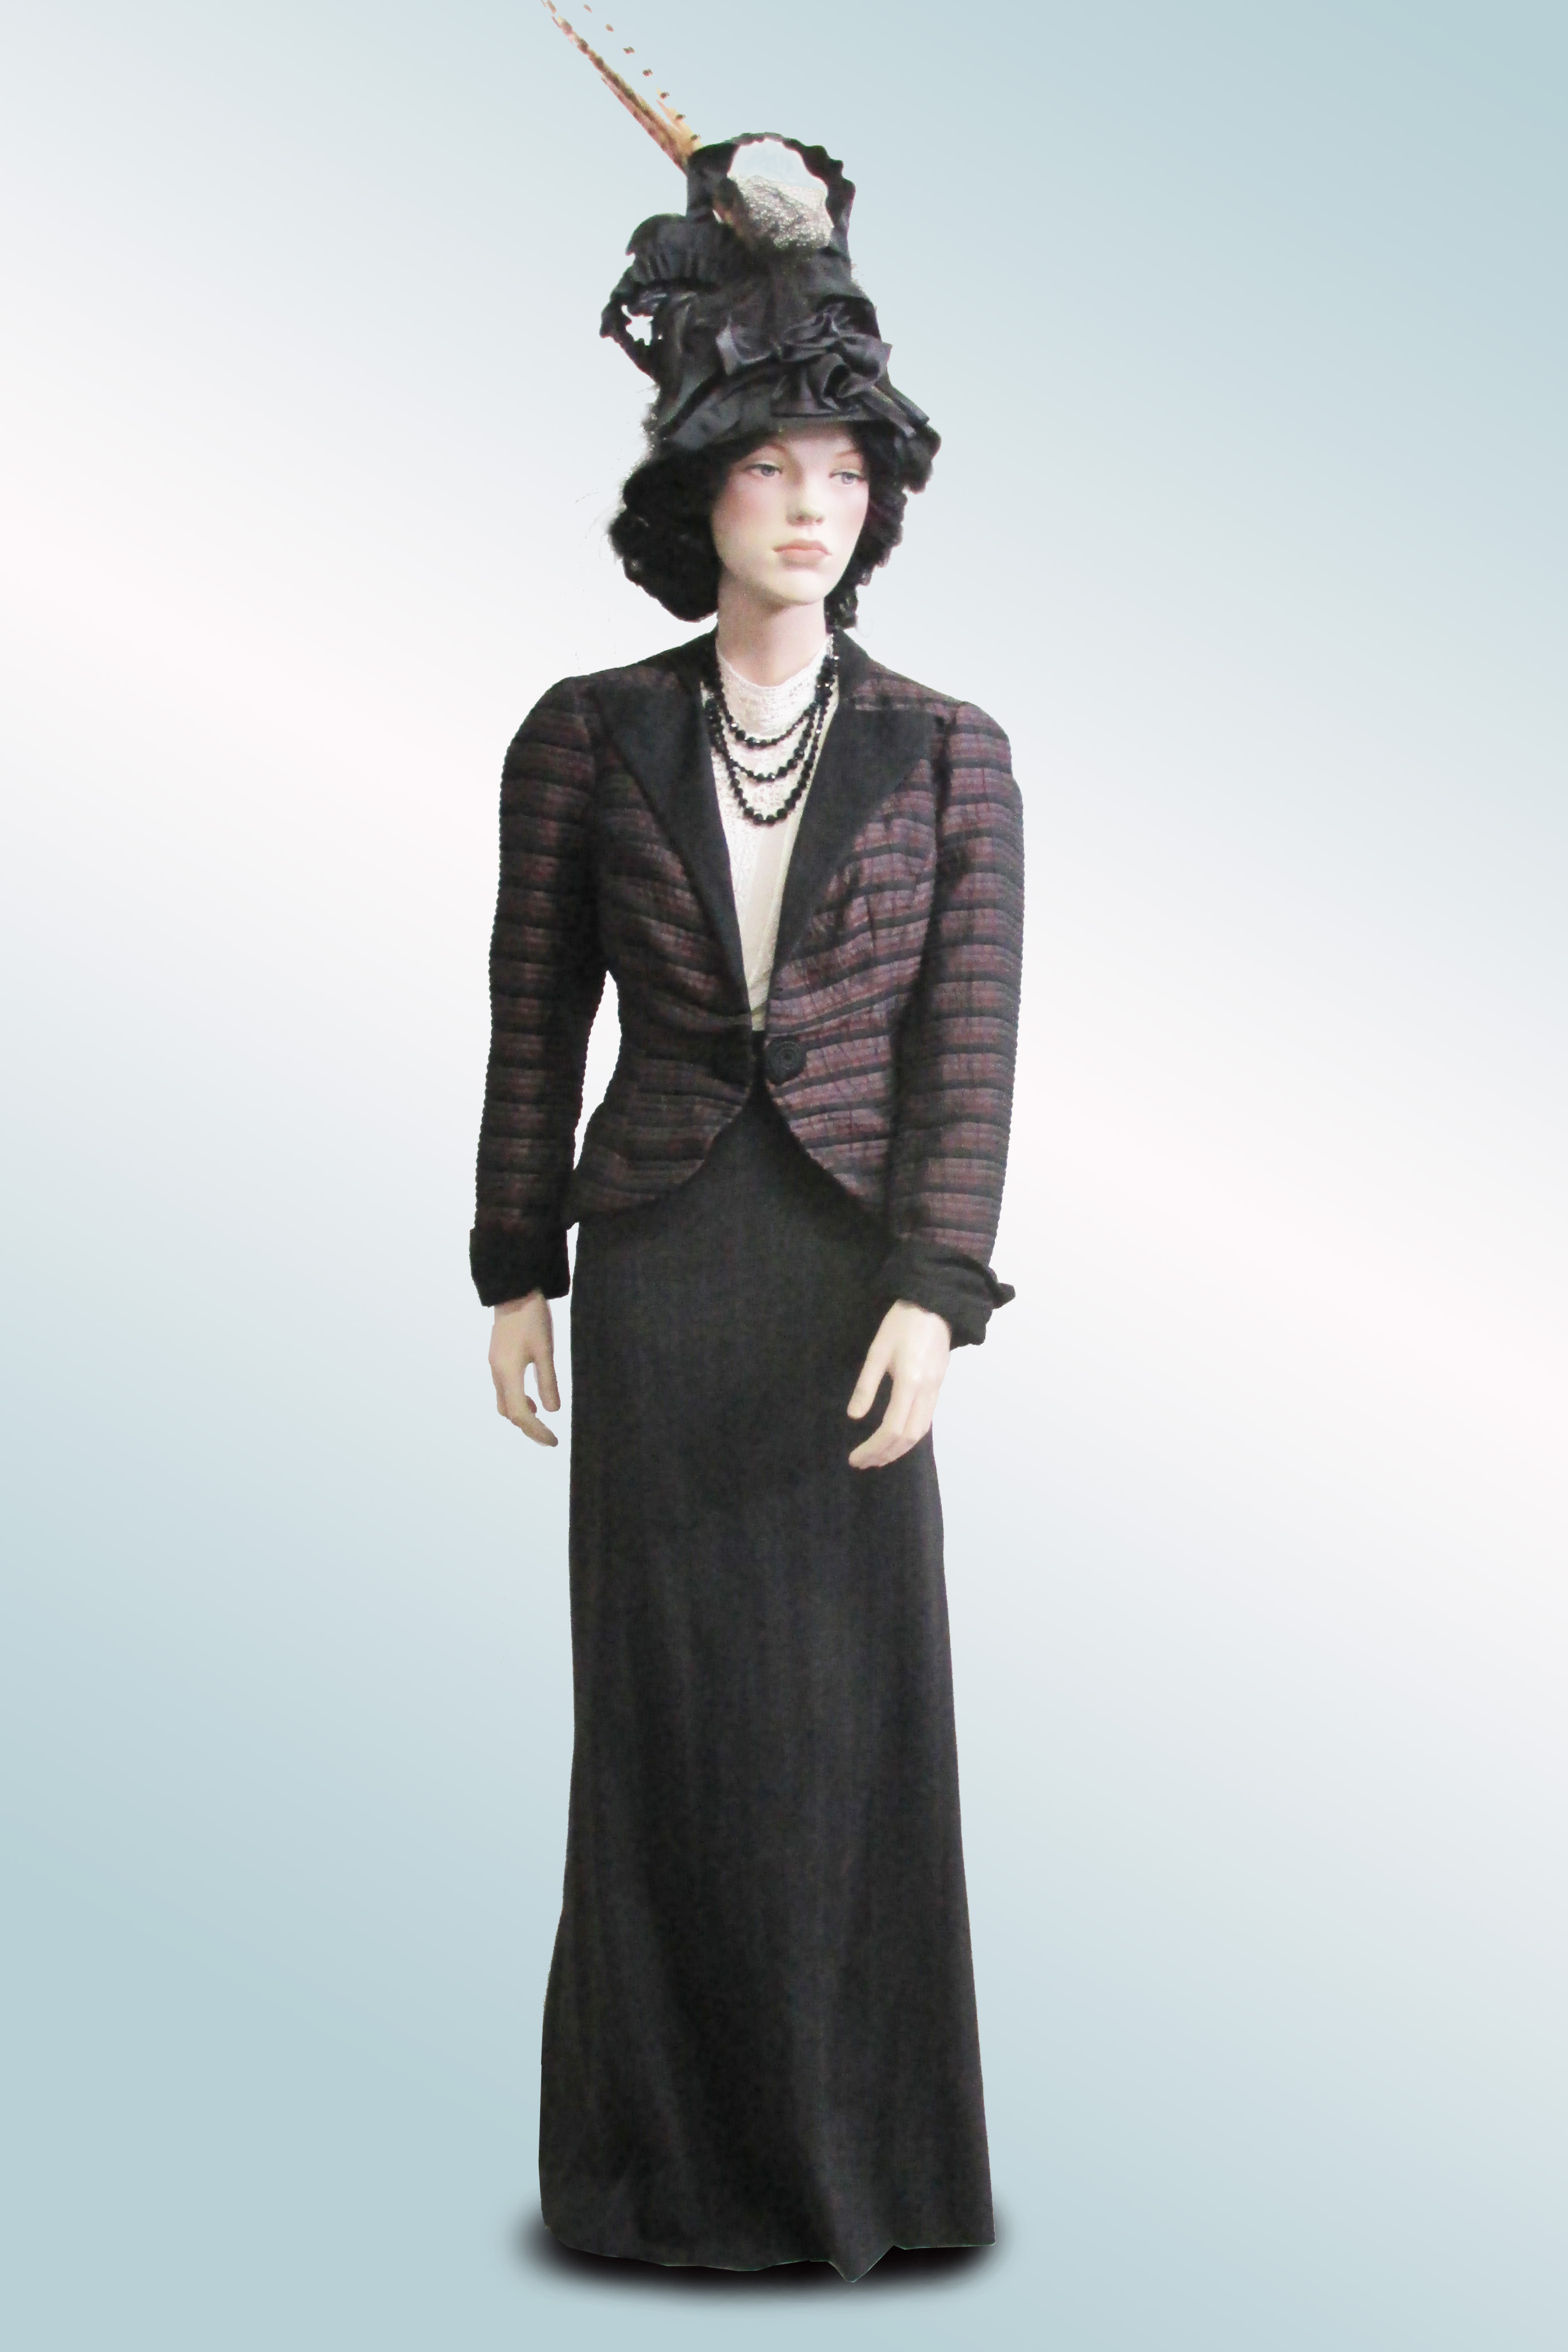 Skirt and Maroon Stripe Taffeta Jacket with Hat with Feathers 1900s